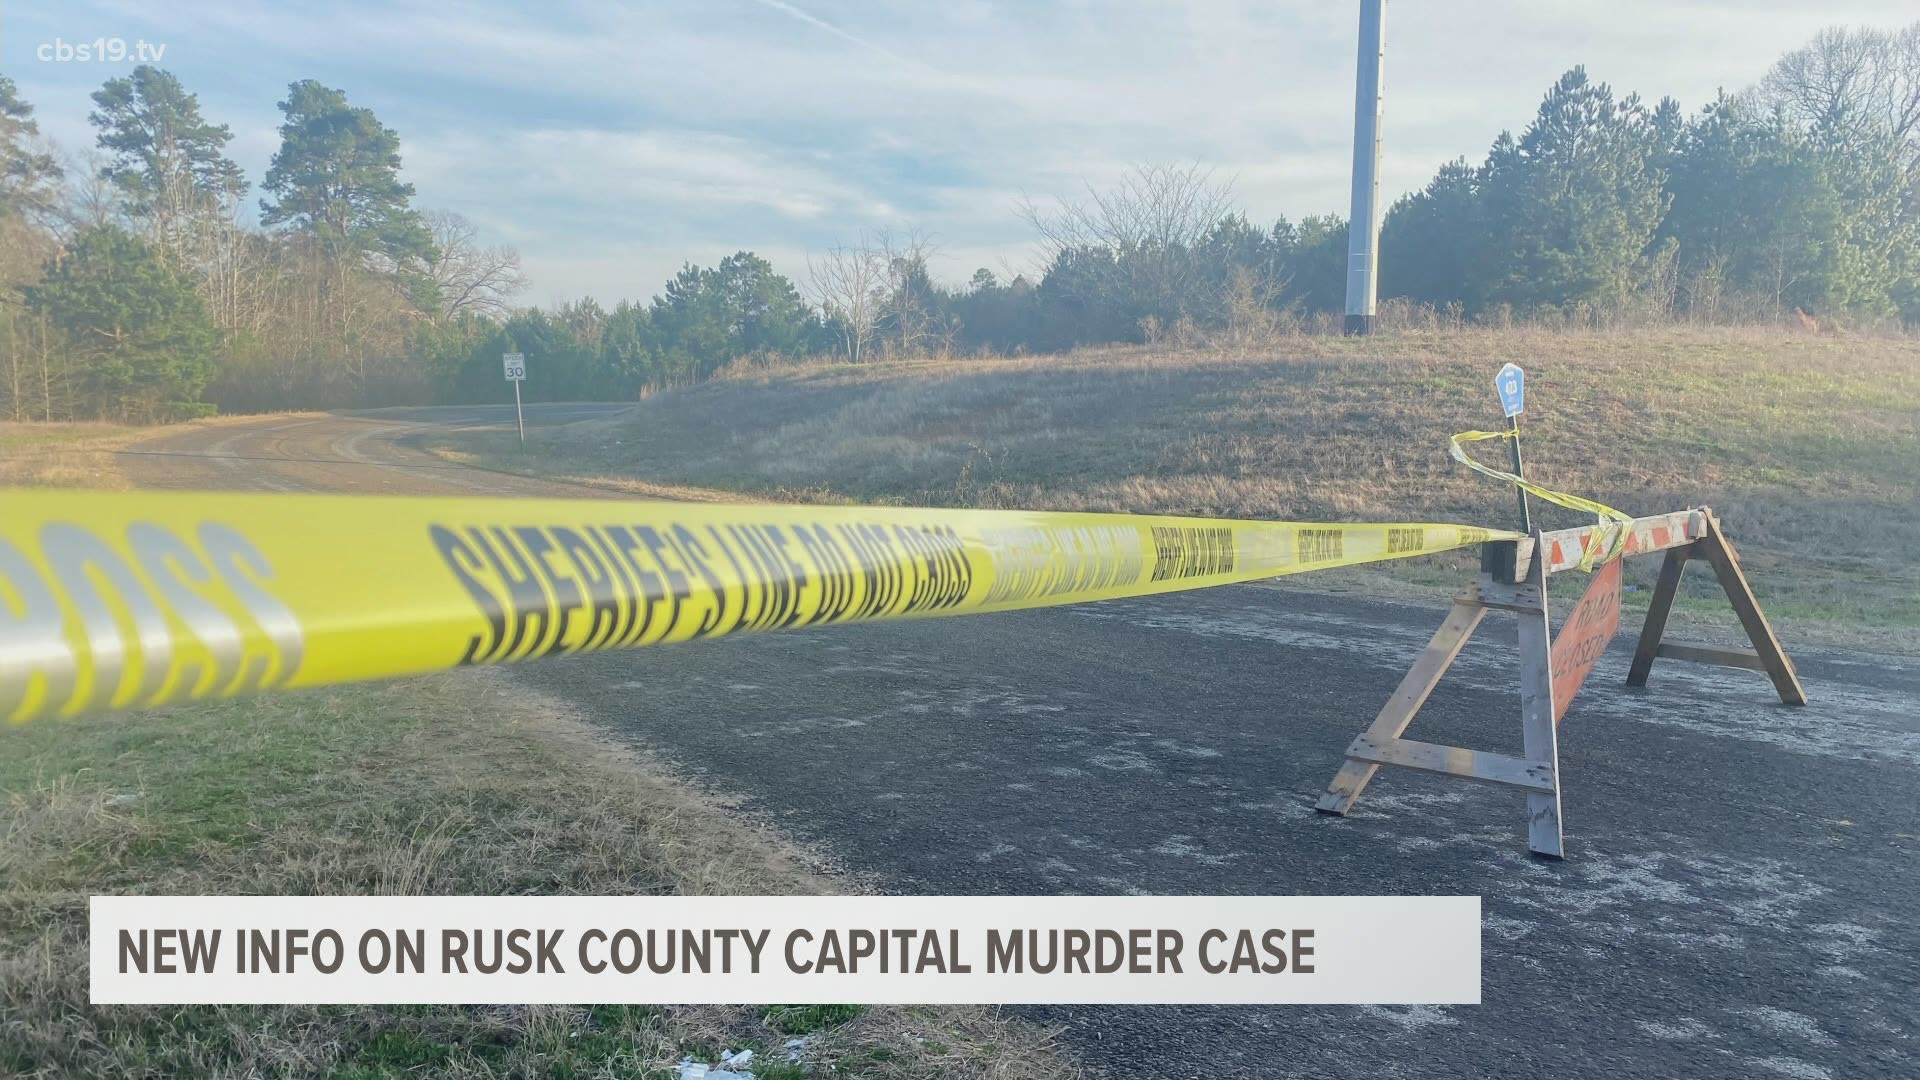 The Rusk County Sheriff’s Office has made an arrest in connection with the murder of Clarence (Scott) Reneau.